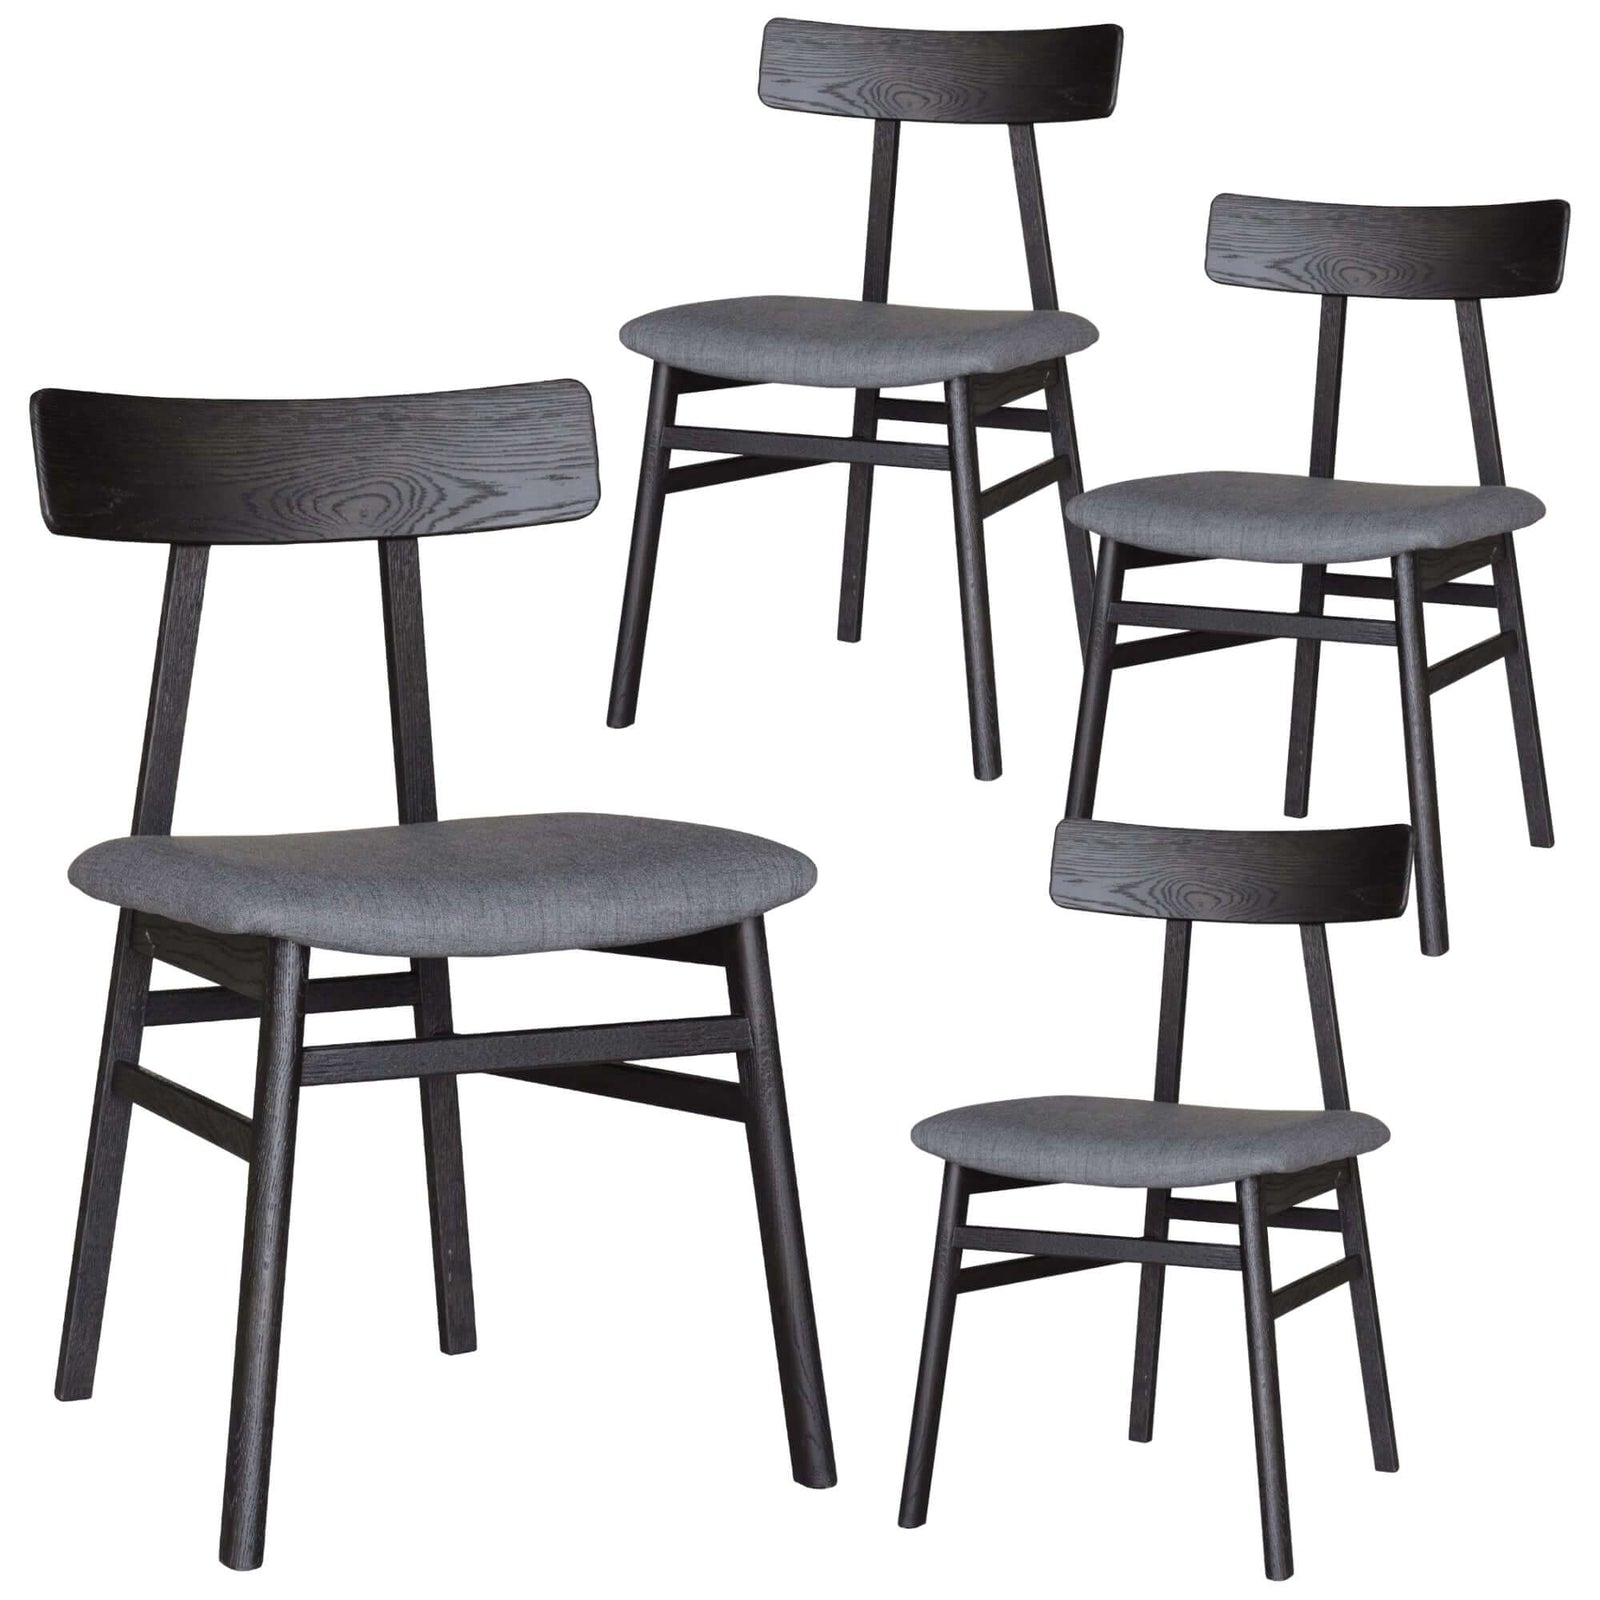 Claire Dining Chair Set of 4 Solid Oak Wood Fabric Seat Furniture - Black-Upinteriors